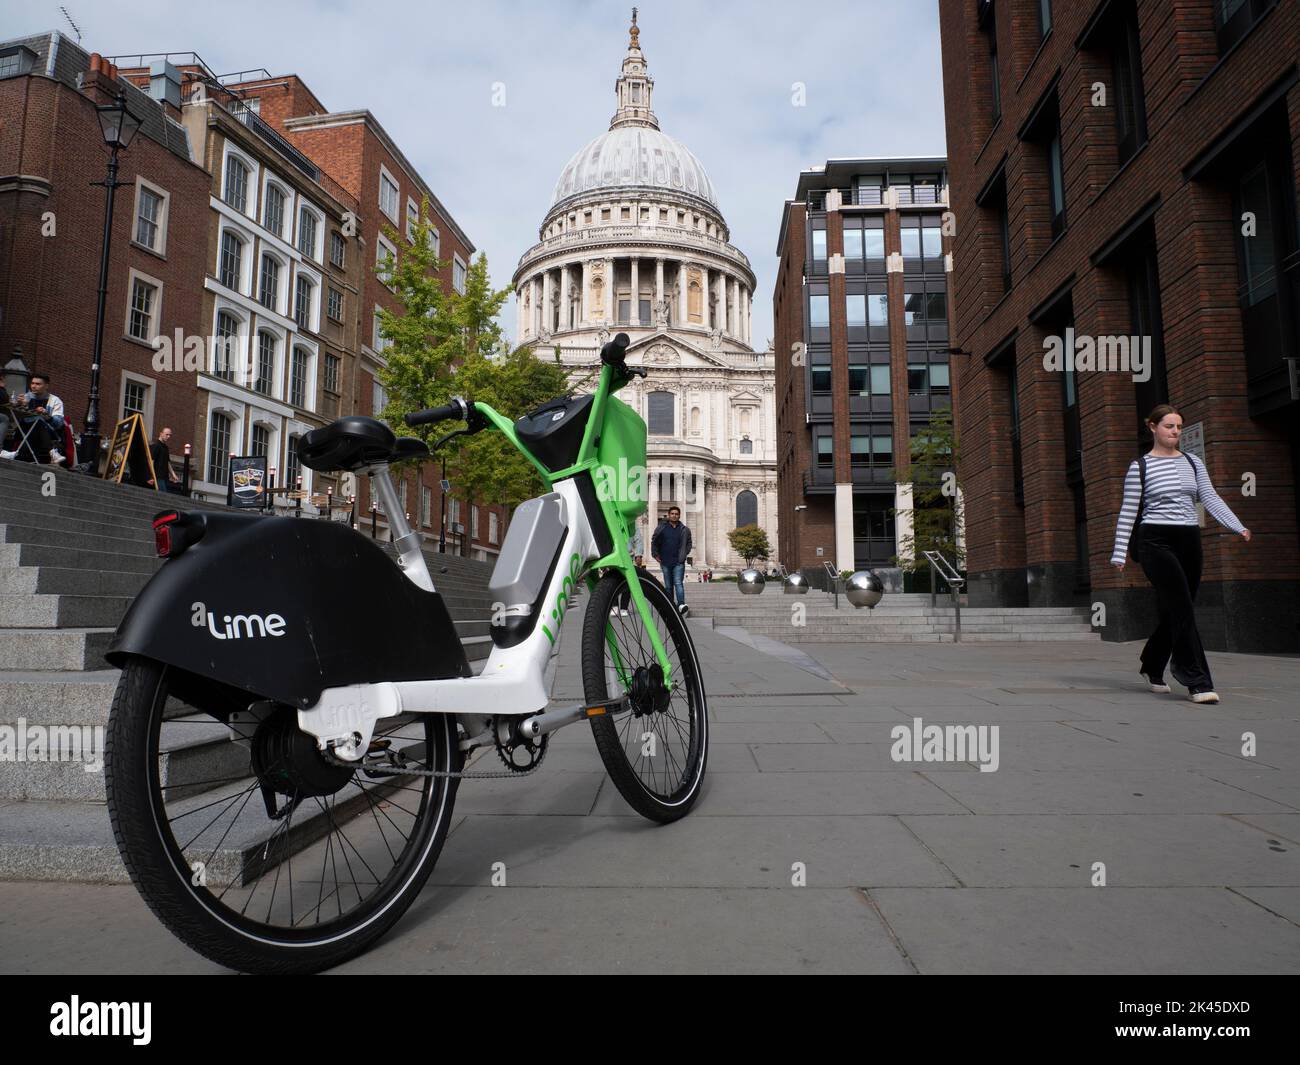 Lime Electric rental e-bike parked near St Pauls Cathedral, City of London, Stock Photo